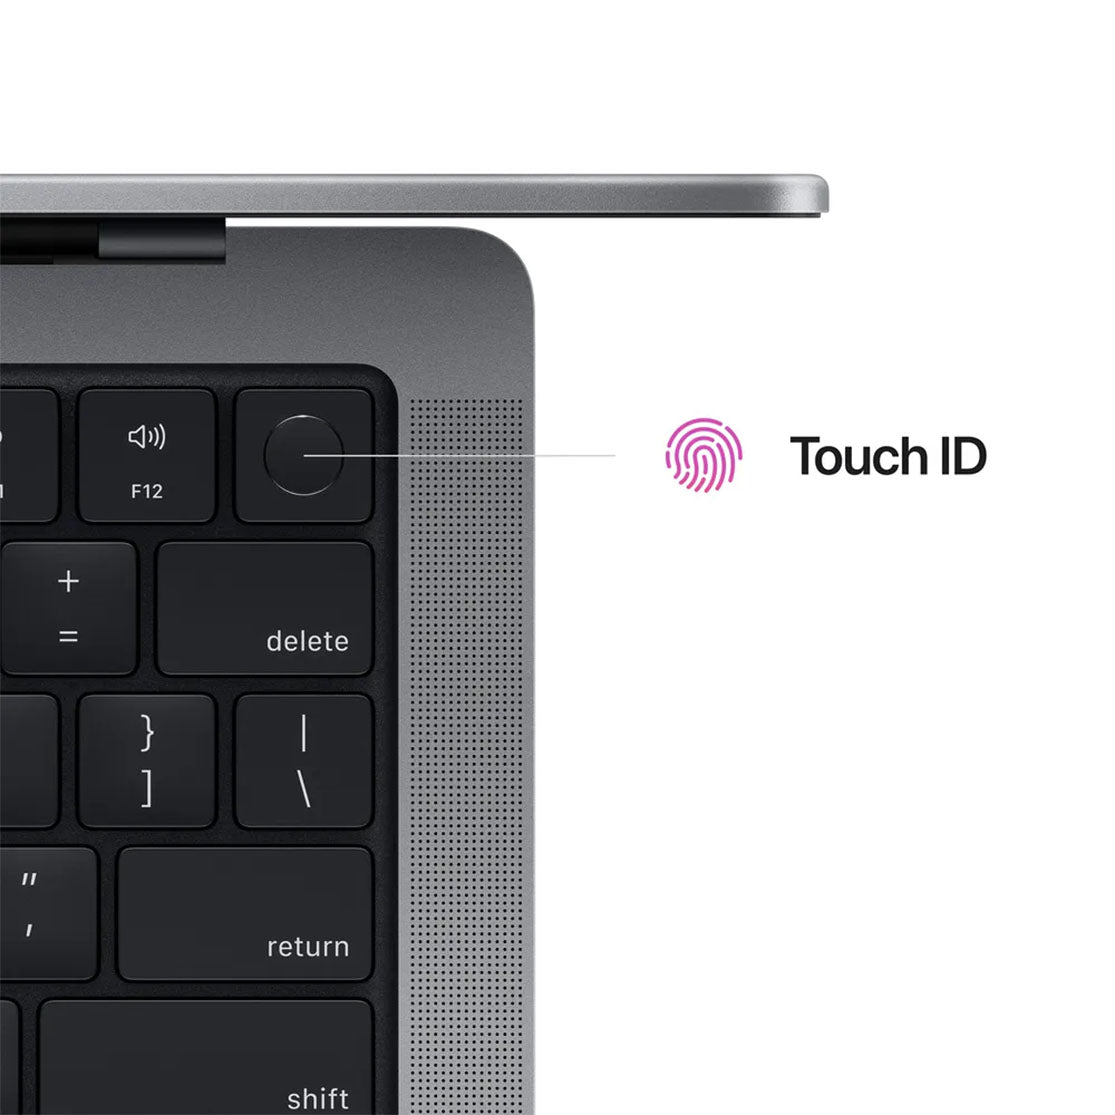 14-inch brilliance; Touch ID elegance commands attention